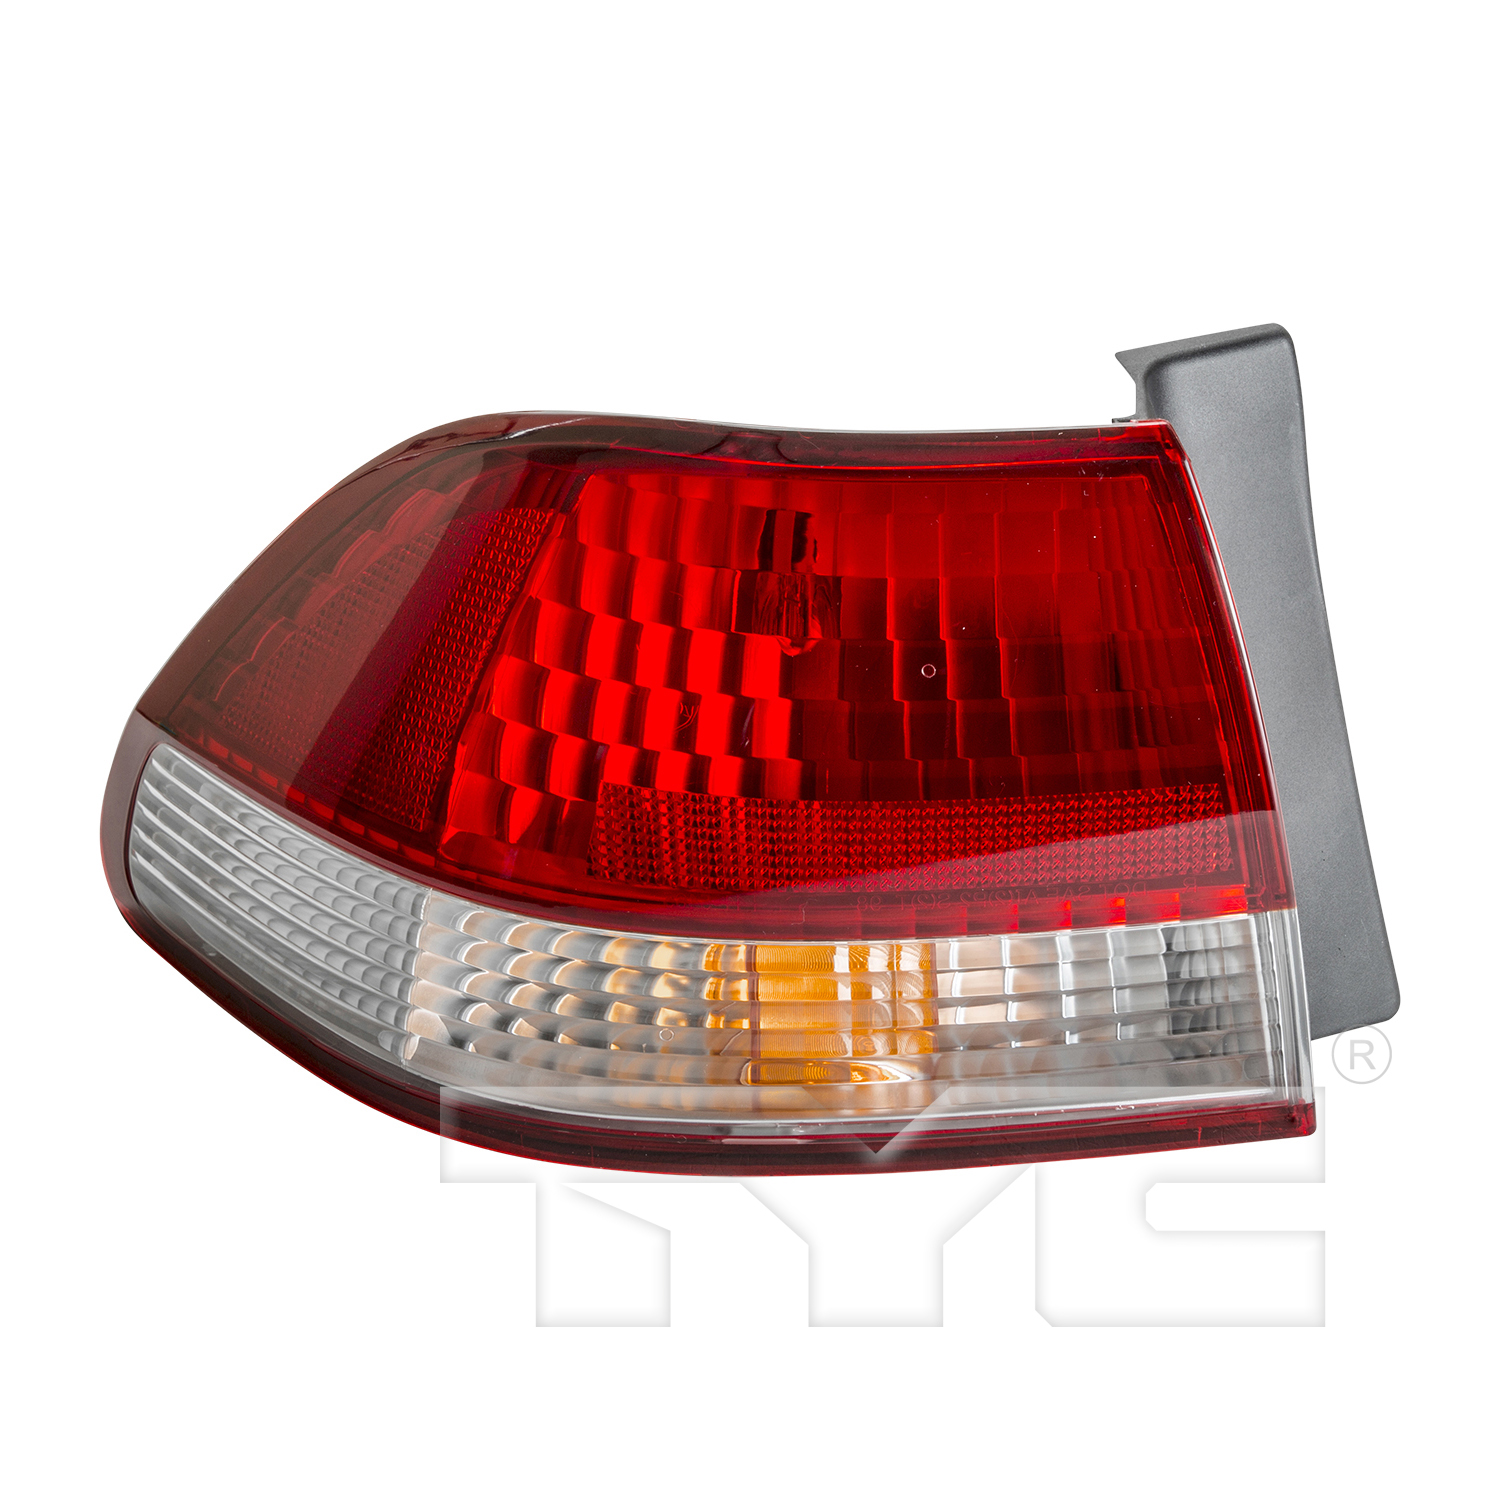 Aftermarket TAILLIGHTS for HONDA - ACCORD, ACCORD,01-02,LT Taillamp assy